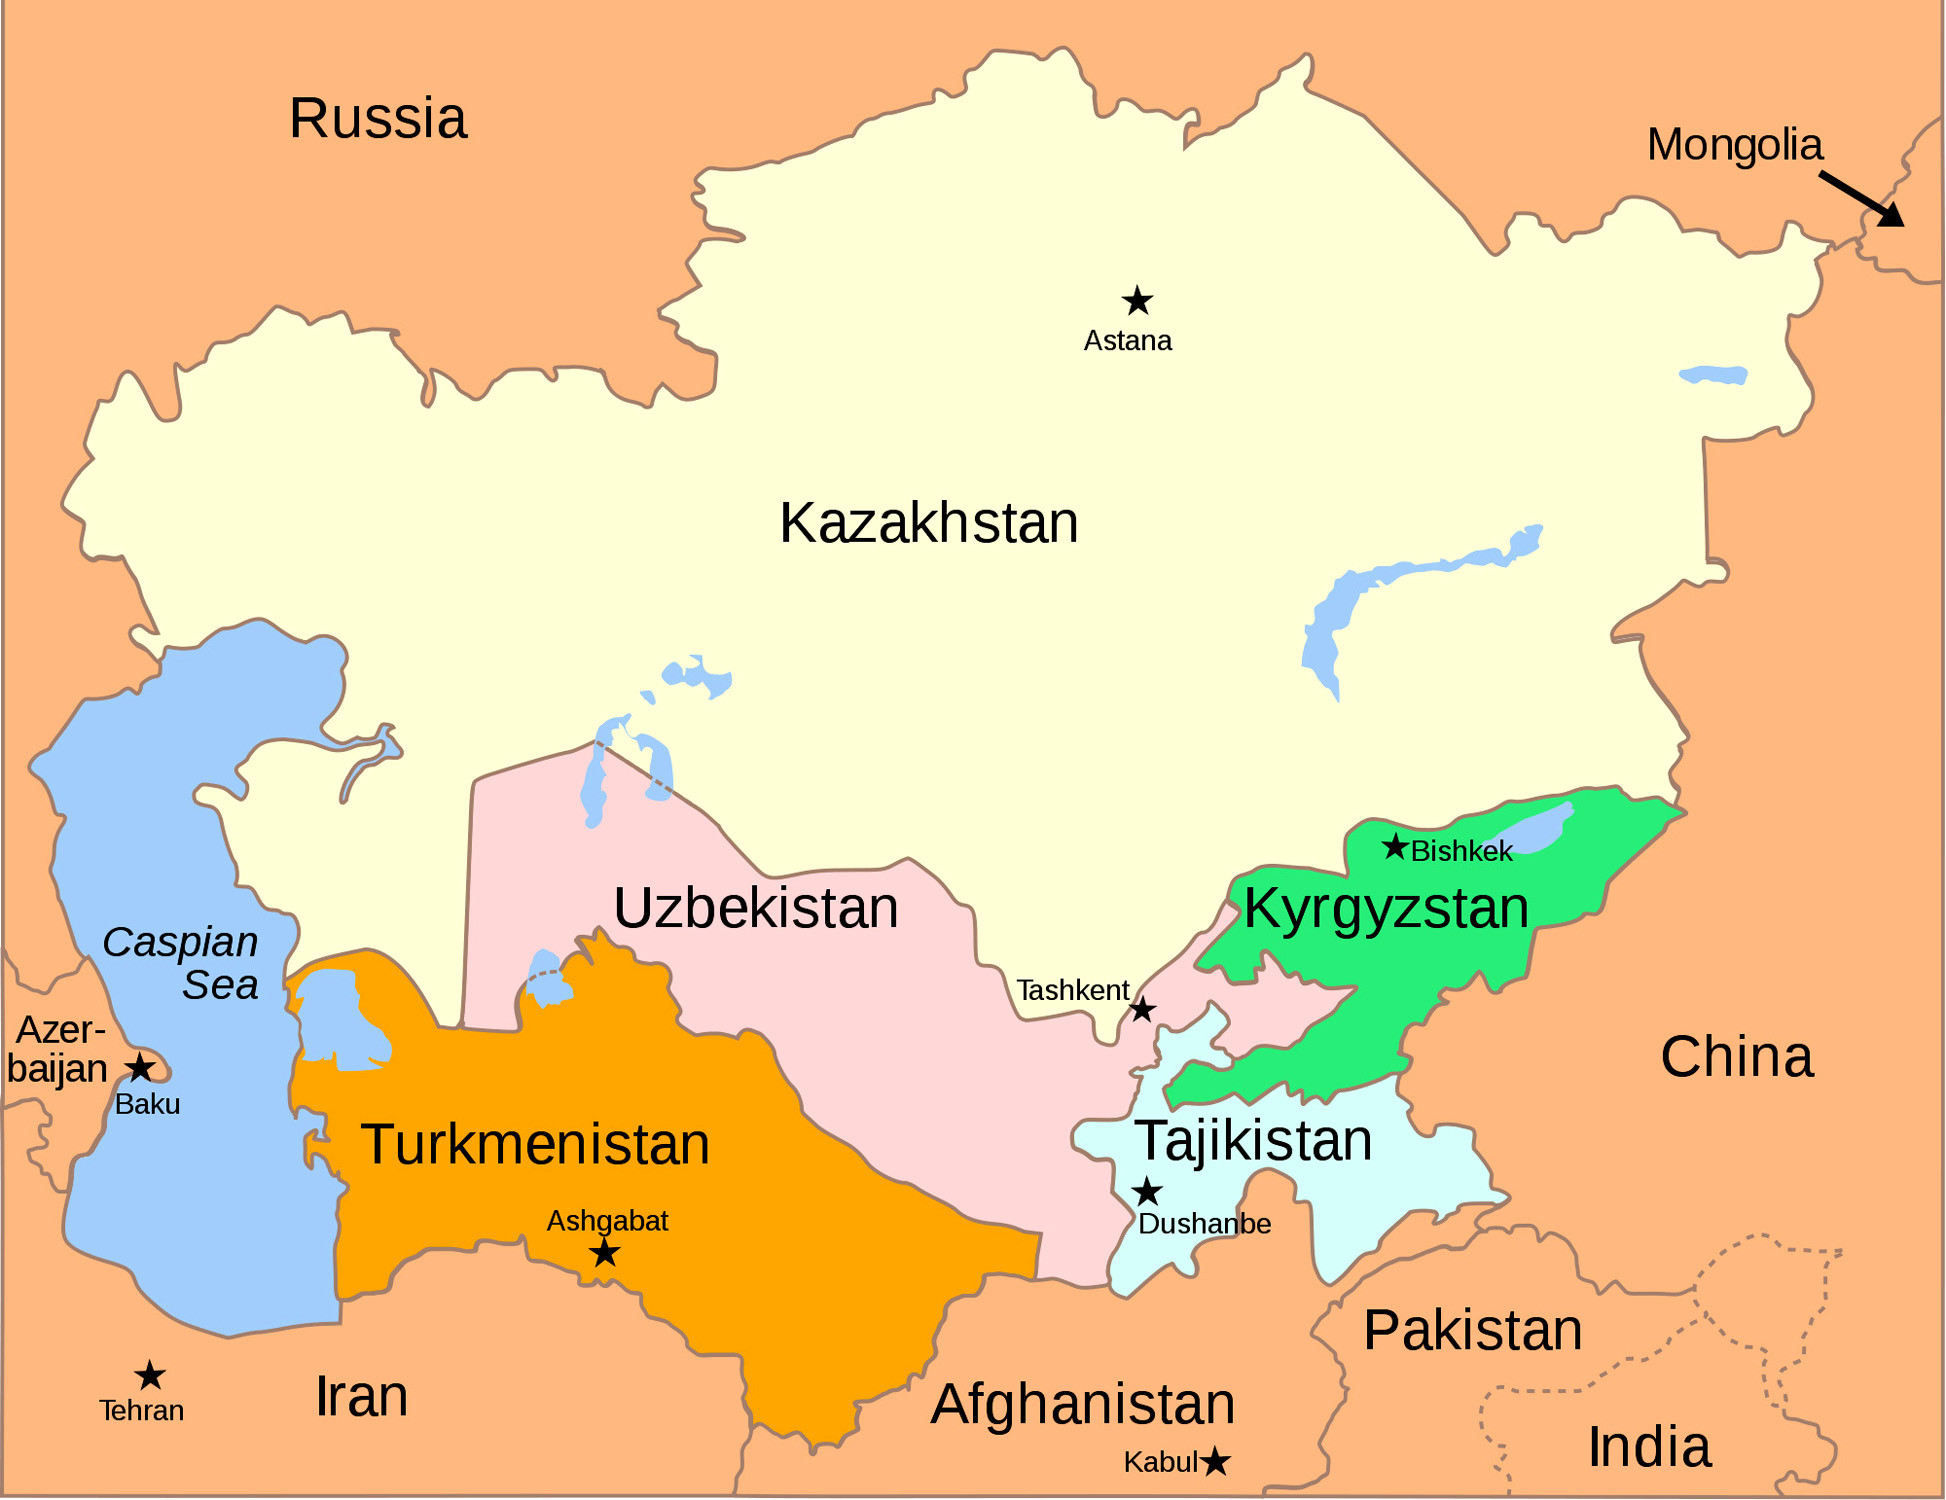 Central Asia is composed of five countries that gained independence after the collapse of the Soviet Union in the early 1990s. About 66 million people live in the region. Evangelicals comprise about 0.4 percent of the population.